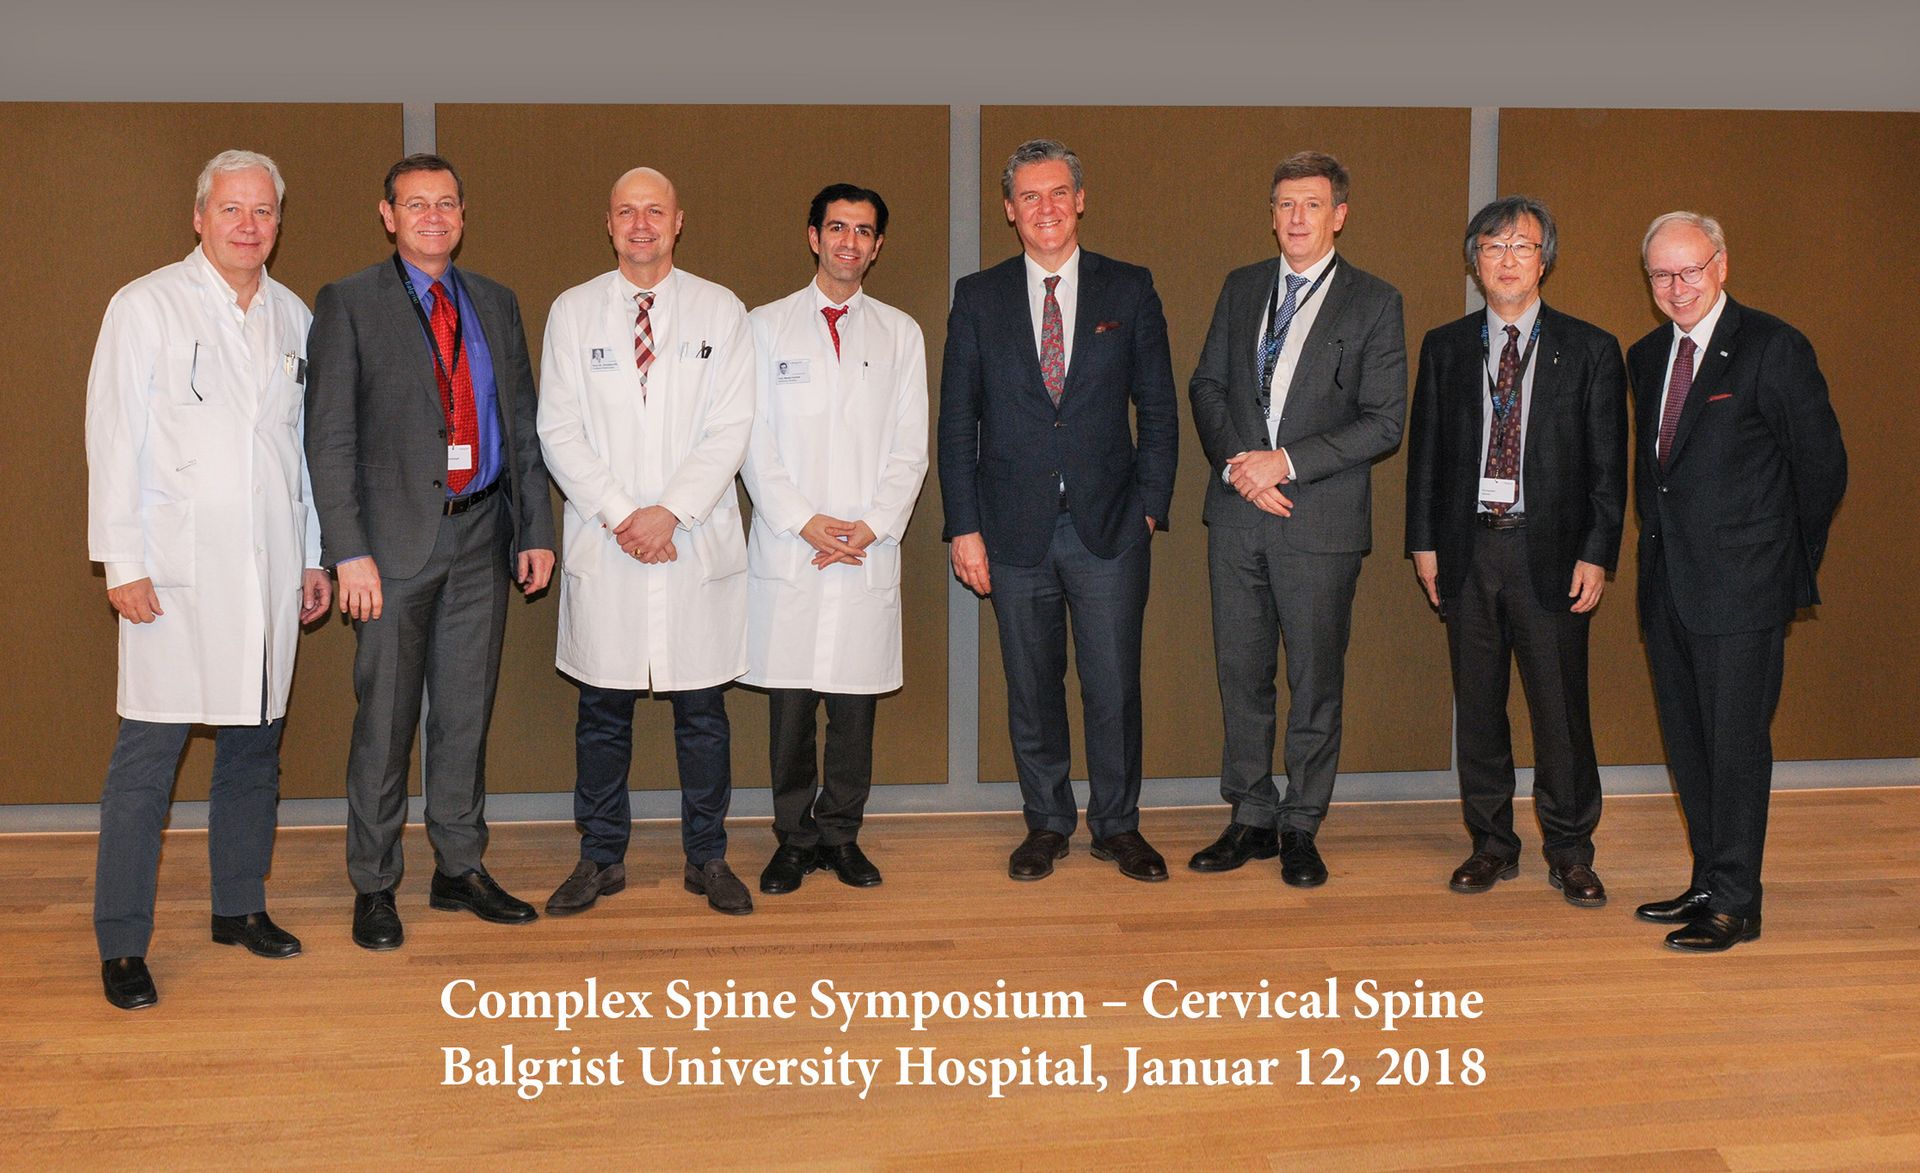 The international faculty of the Complex Spine Symposium 2017 at Balgrist University Hospital